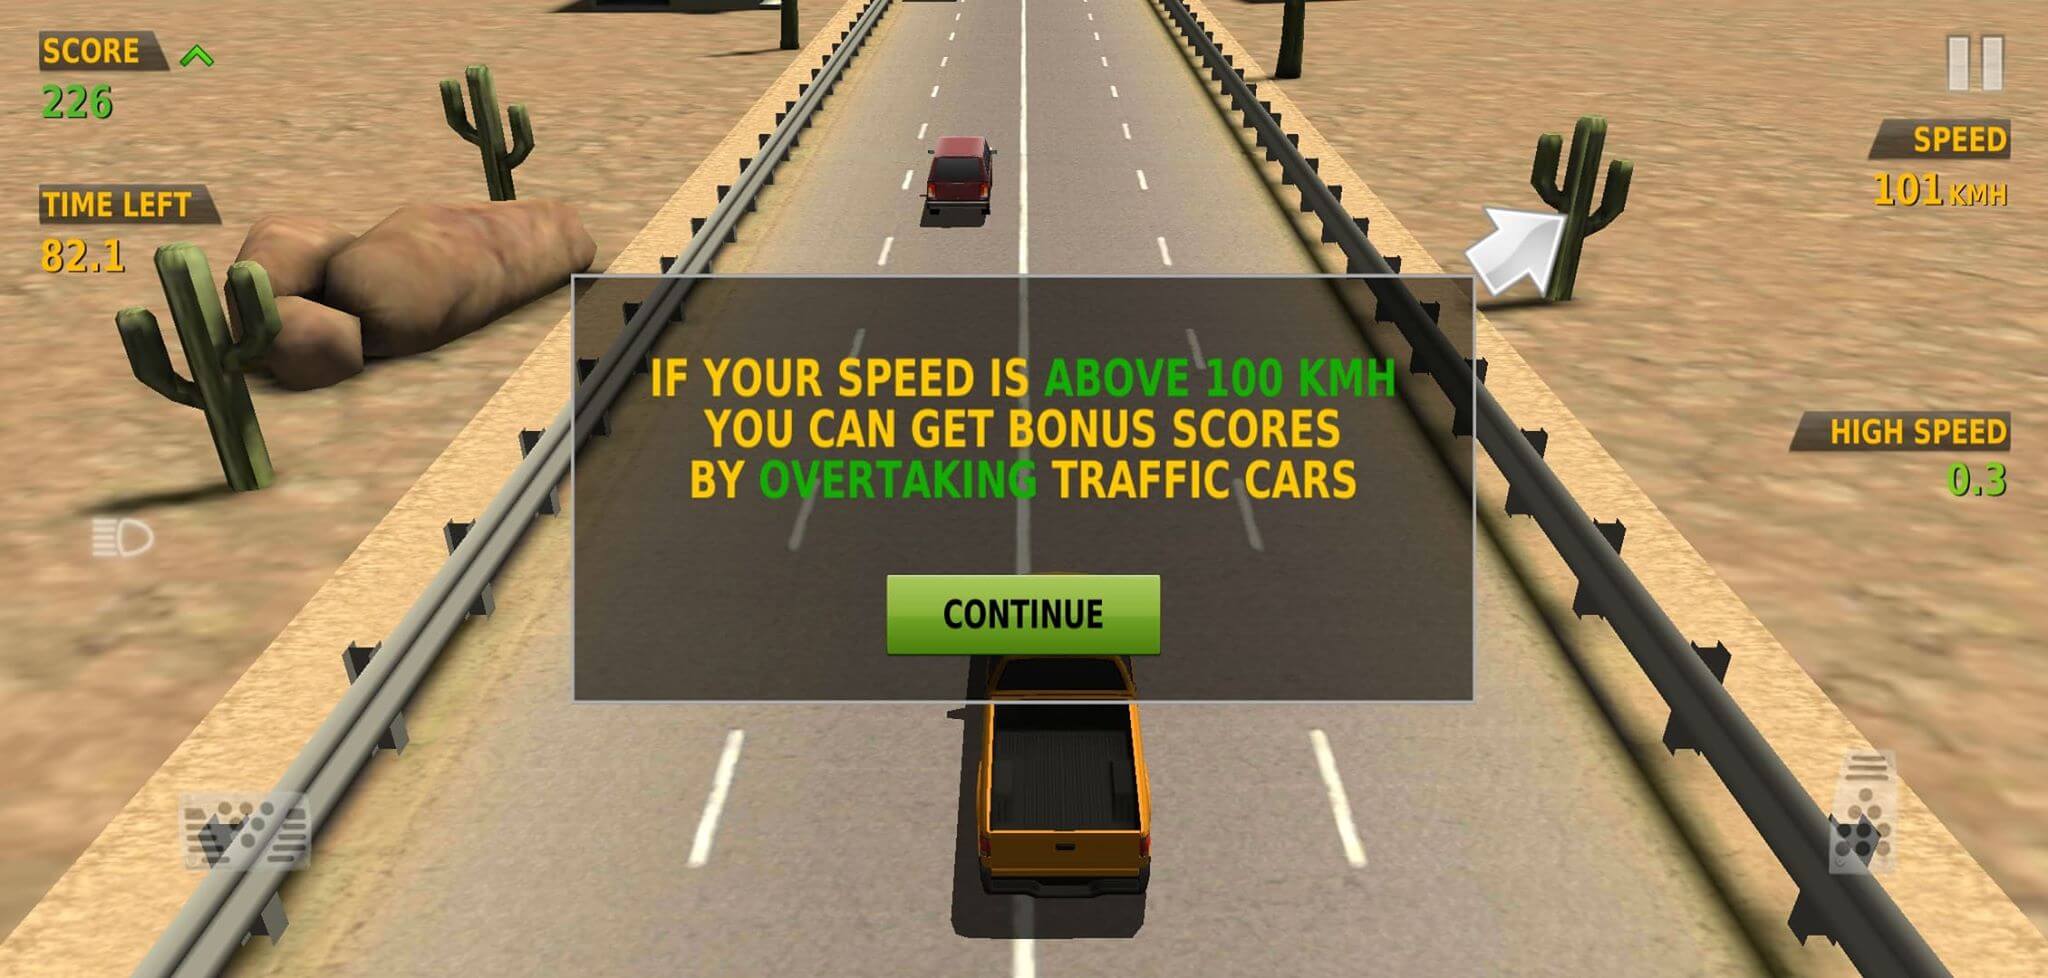 traffic racer hack apk download android